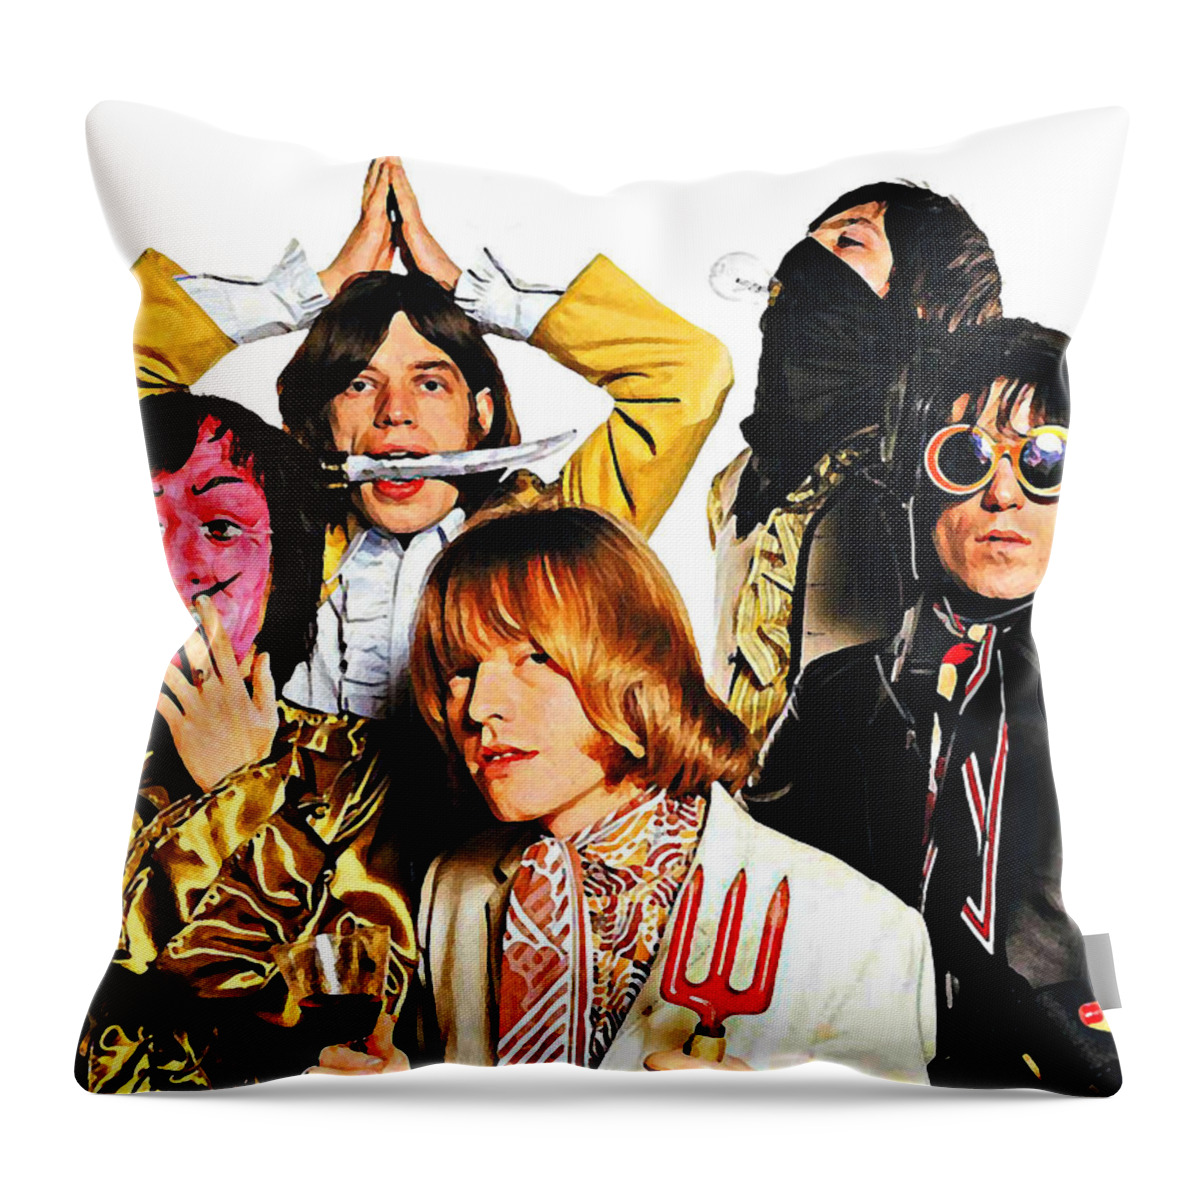 Rolling Stones, Their Satanic Majesties Request, Psychedelic Rock Poster  Throw Pillow by Ziggy Print - Pixels